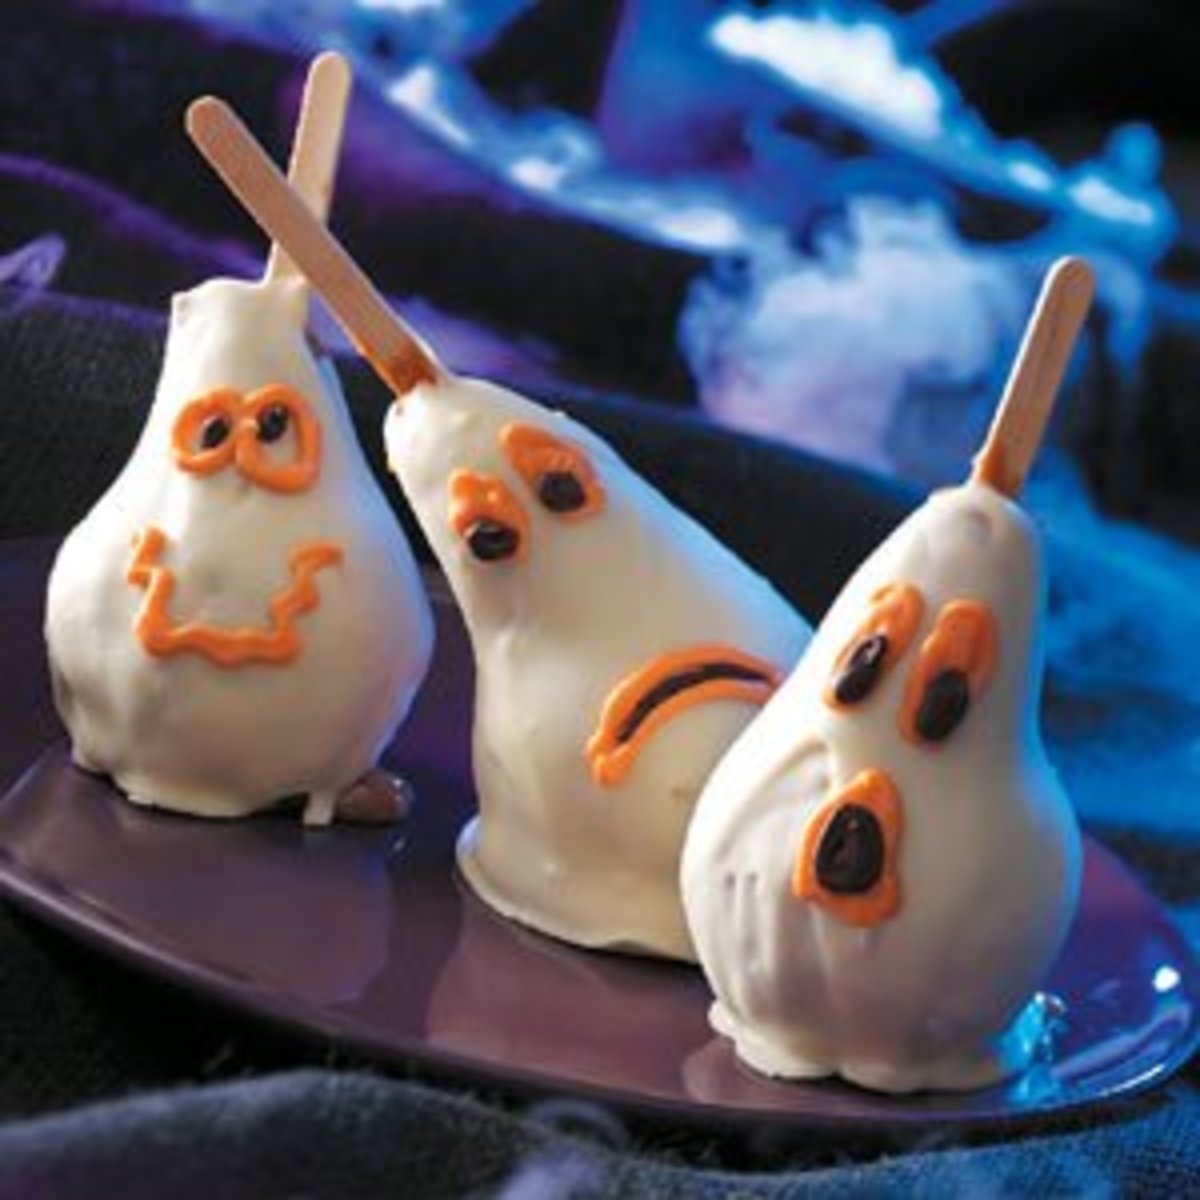 Tricky Halloween treats that make great edible gifts.